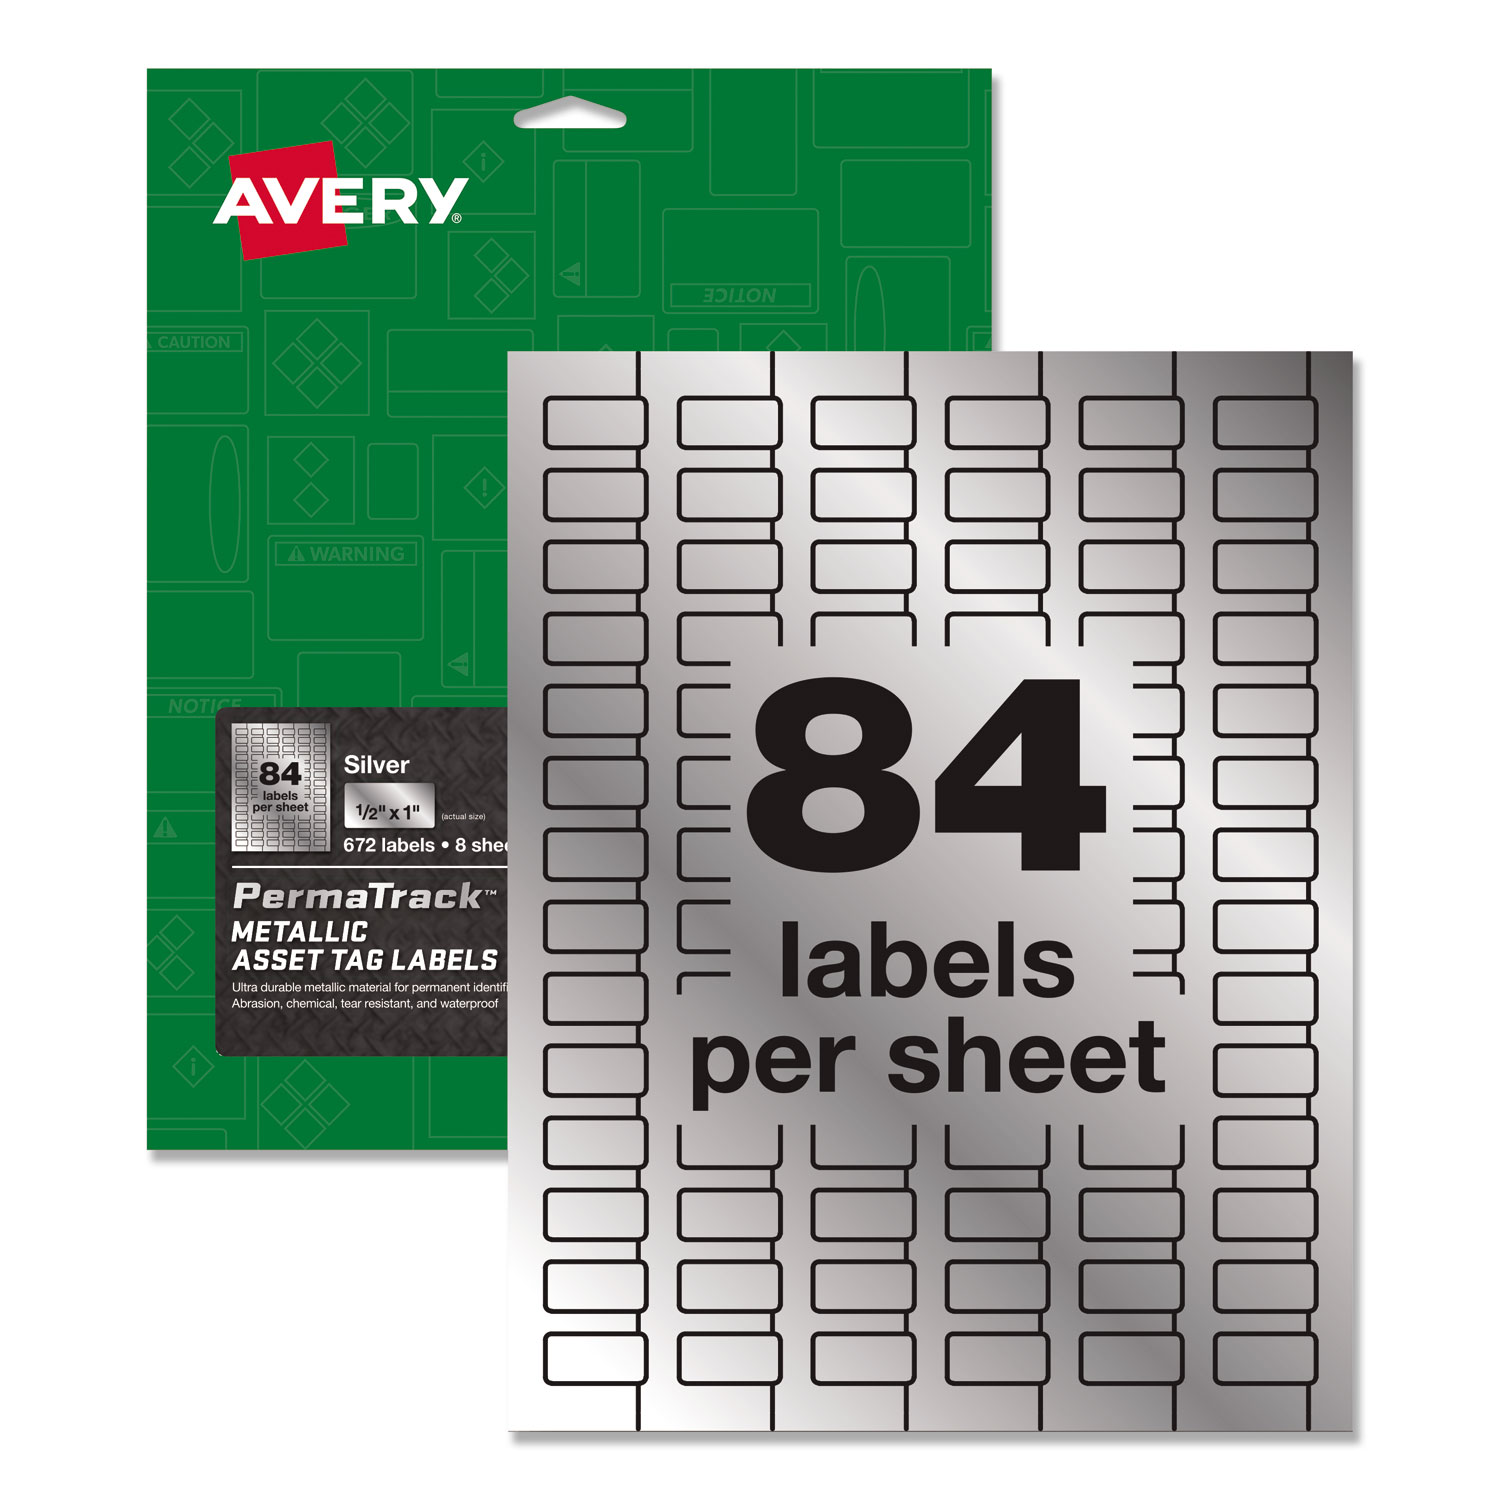  Avery 60519 PermaTrack Metallic Asset Tag Labels, Laser Printers, 0.5 x 1, Silver, 84/Sheet, 8 Sheets/Pack (AVE60519) 